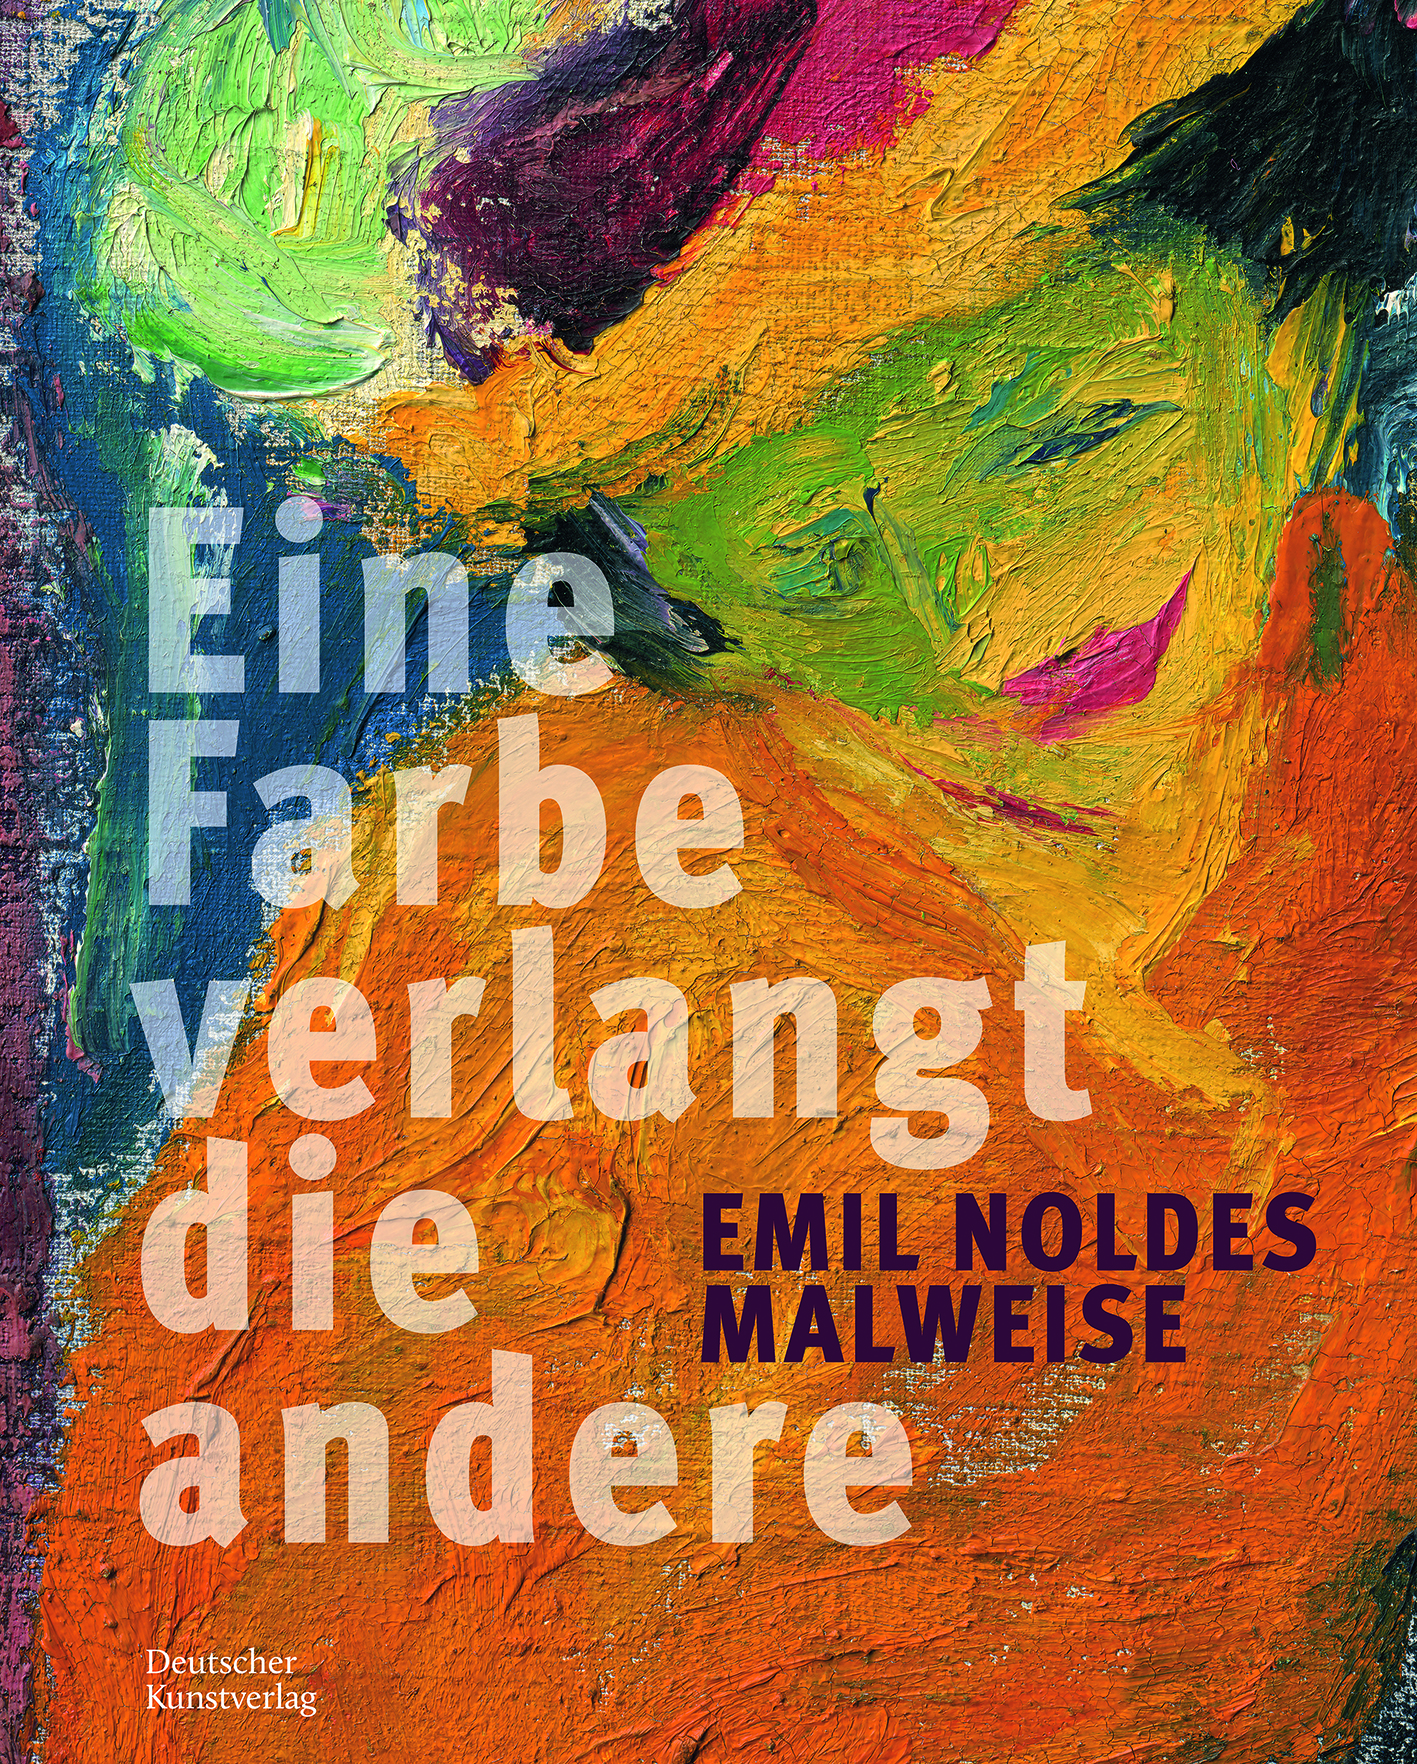 Emil Nolde. My way of painting …